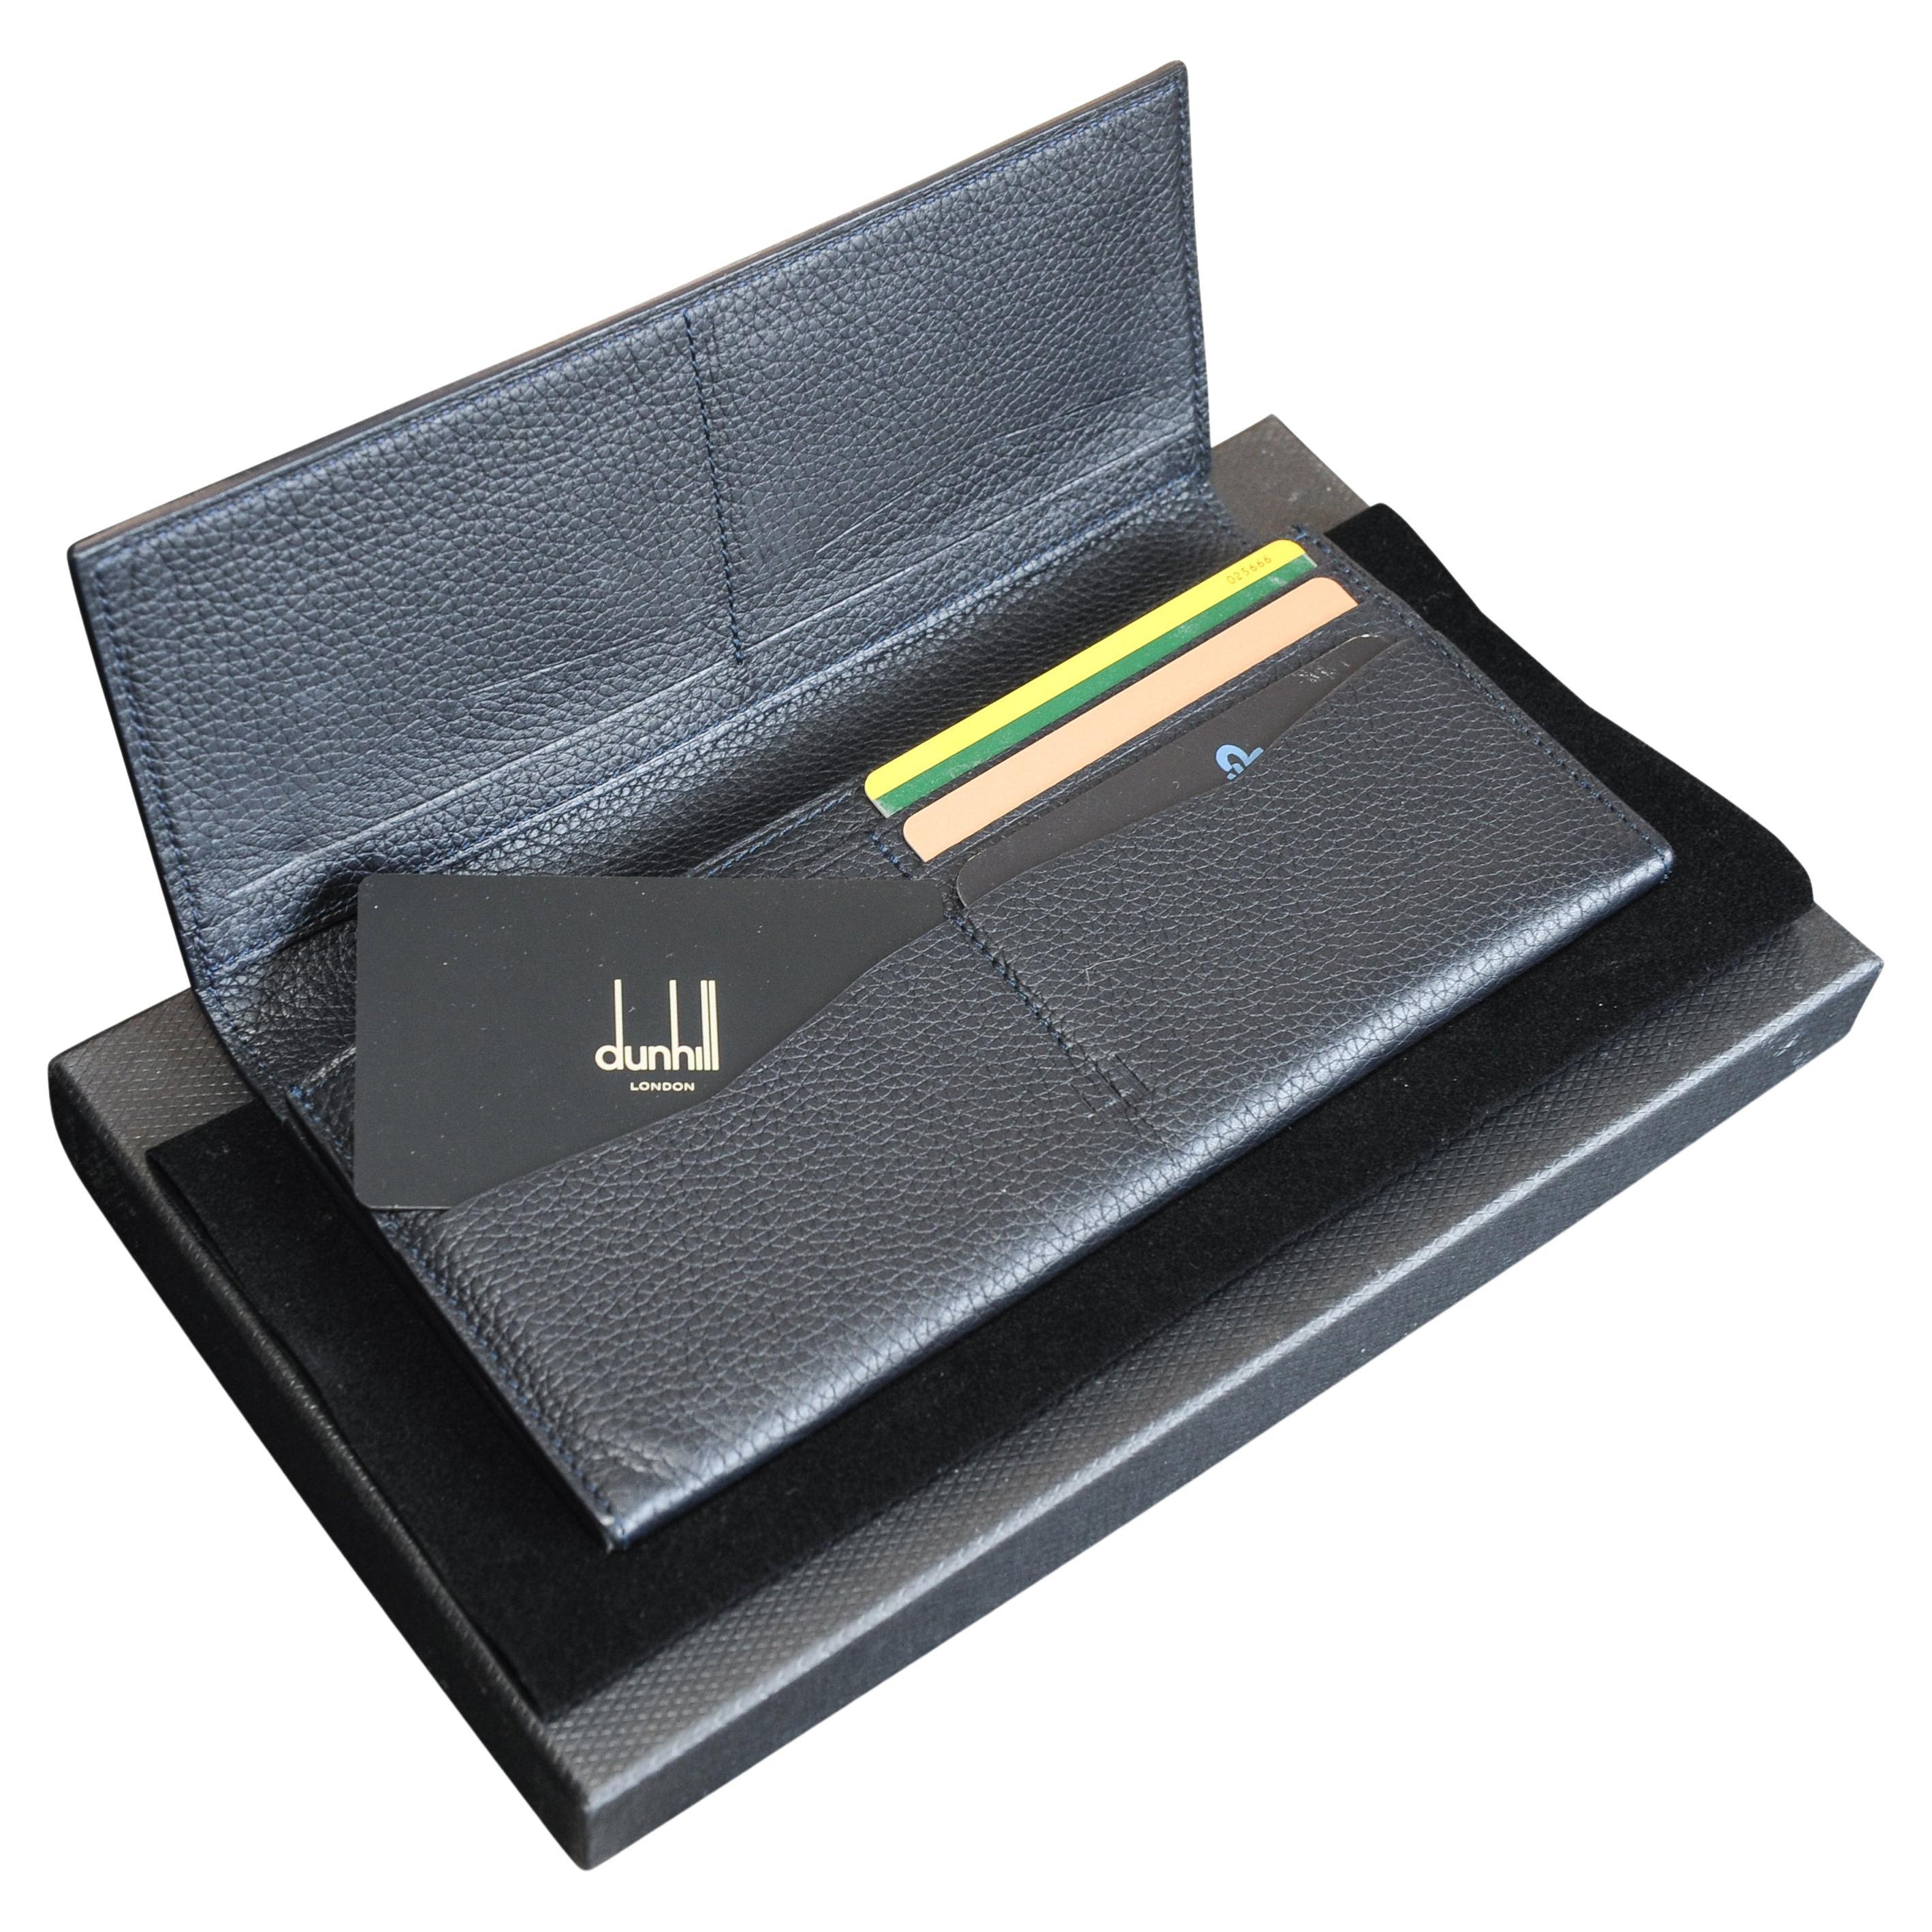 Dunhill London Branded Black Calf Leather Boxed Coat Wallet Made in Italy  For Sale